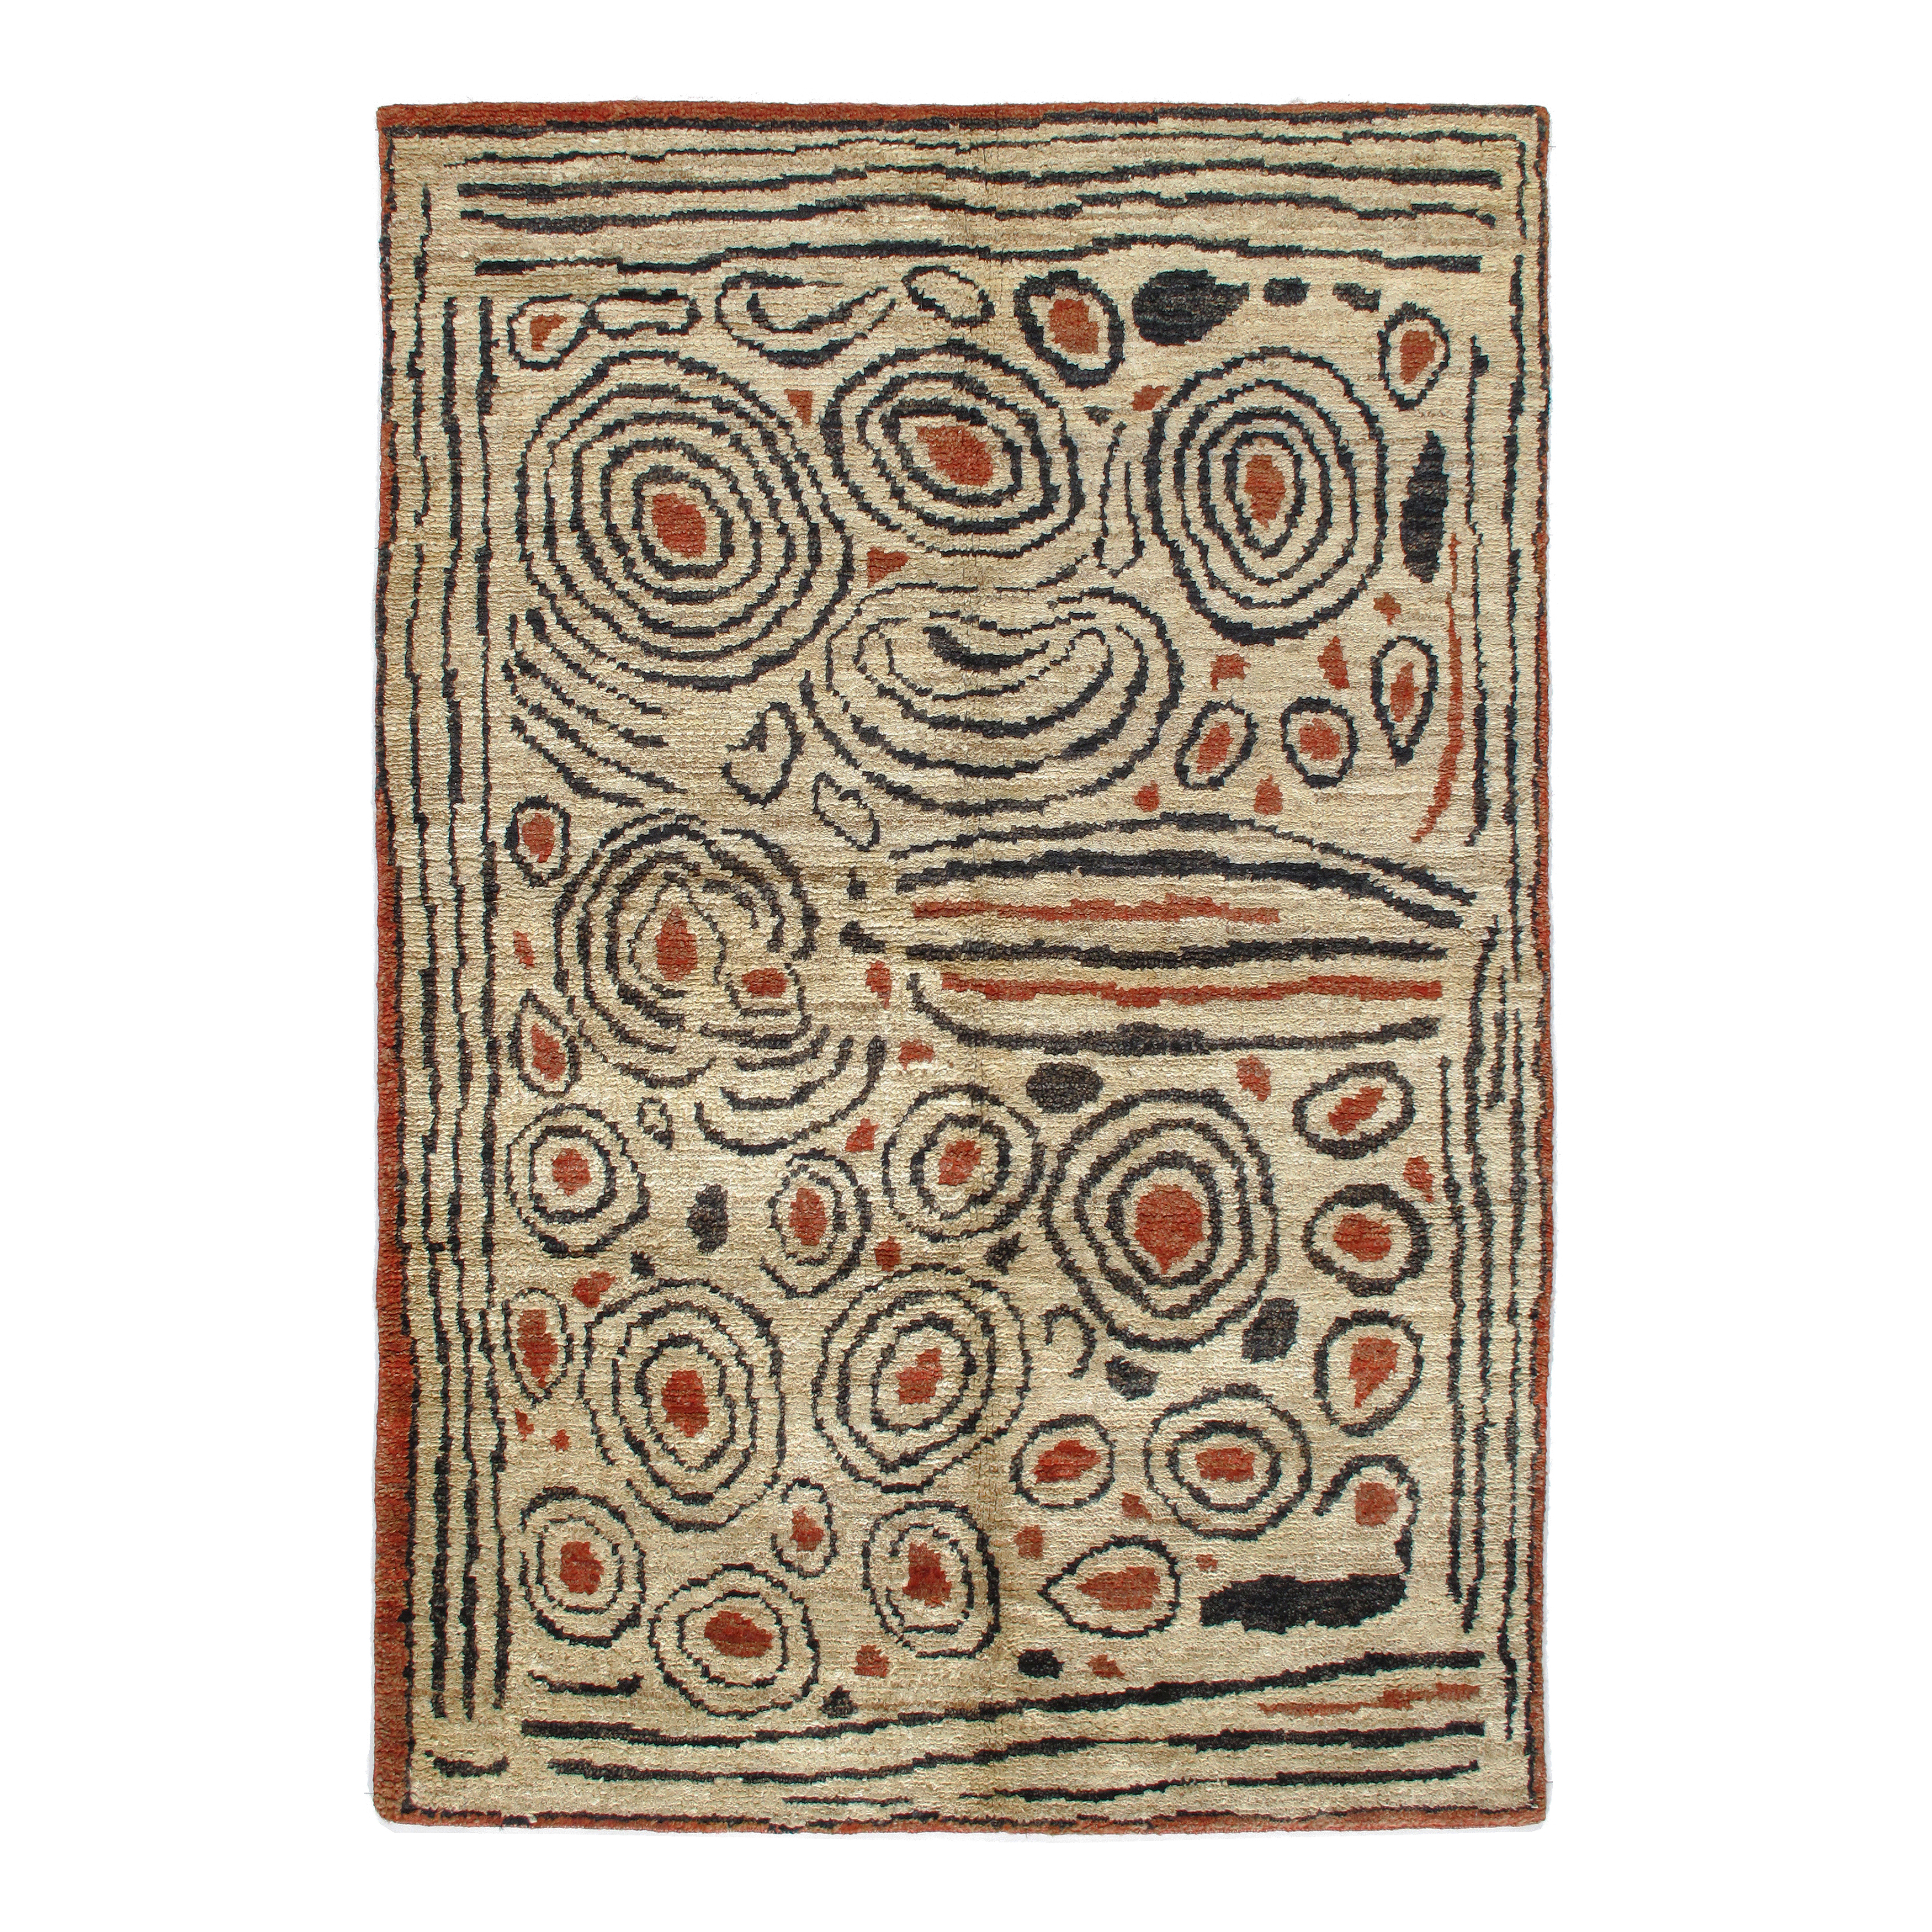 This vintage European rug was handmade and hand knotted. 